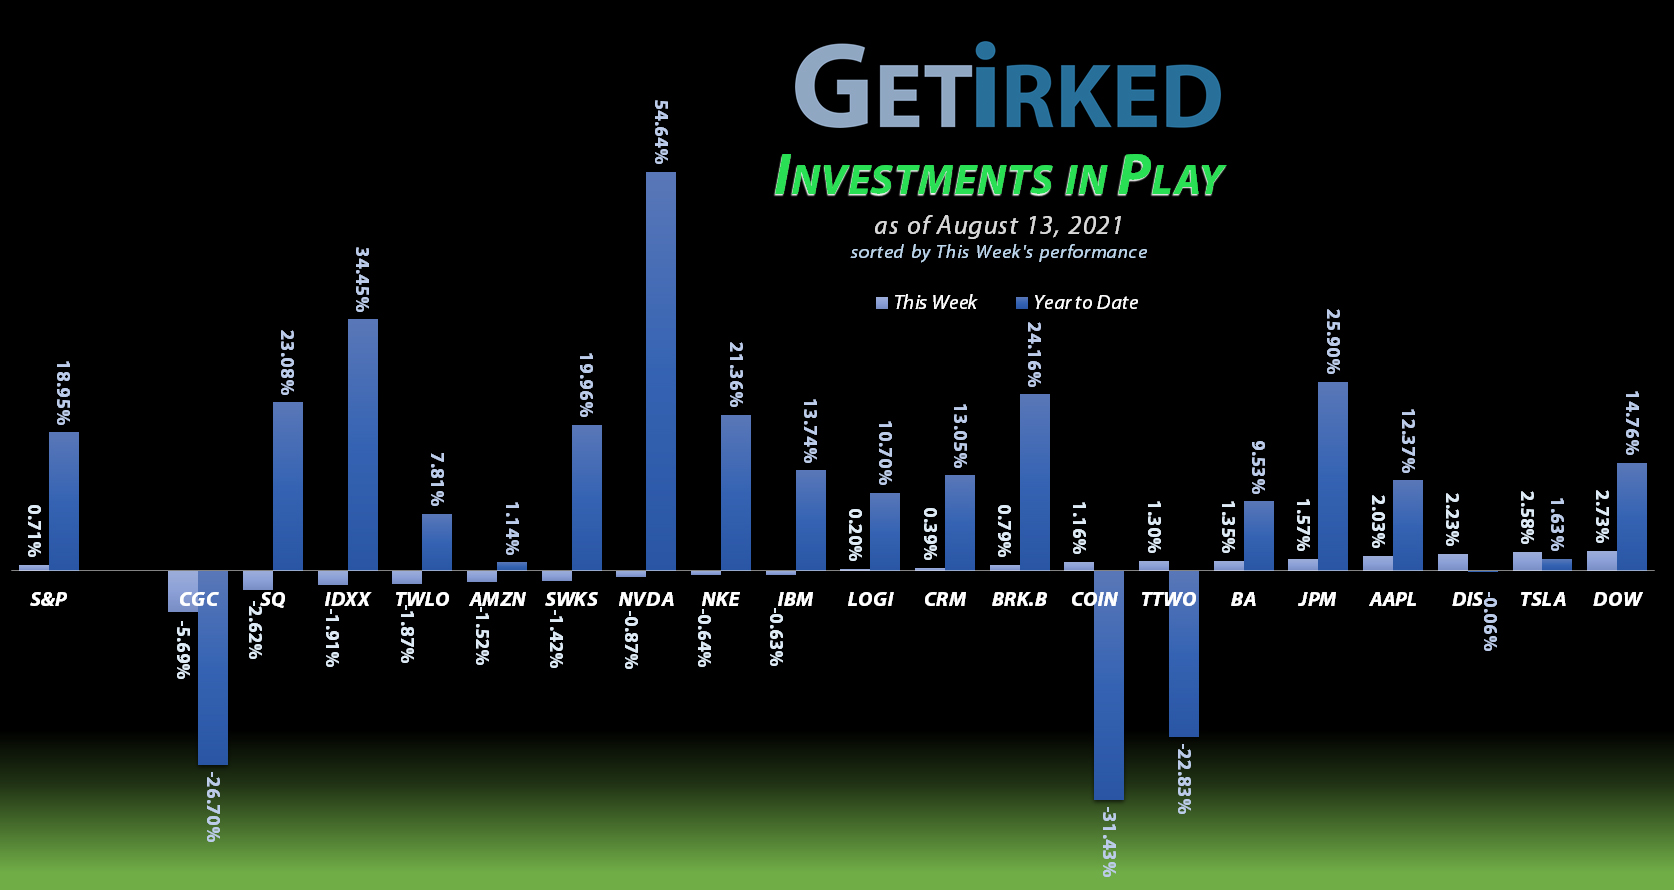 Get Irked - Investments in Play - August 13, 2021